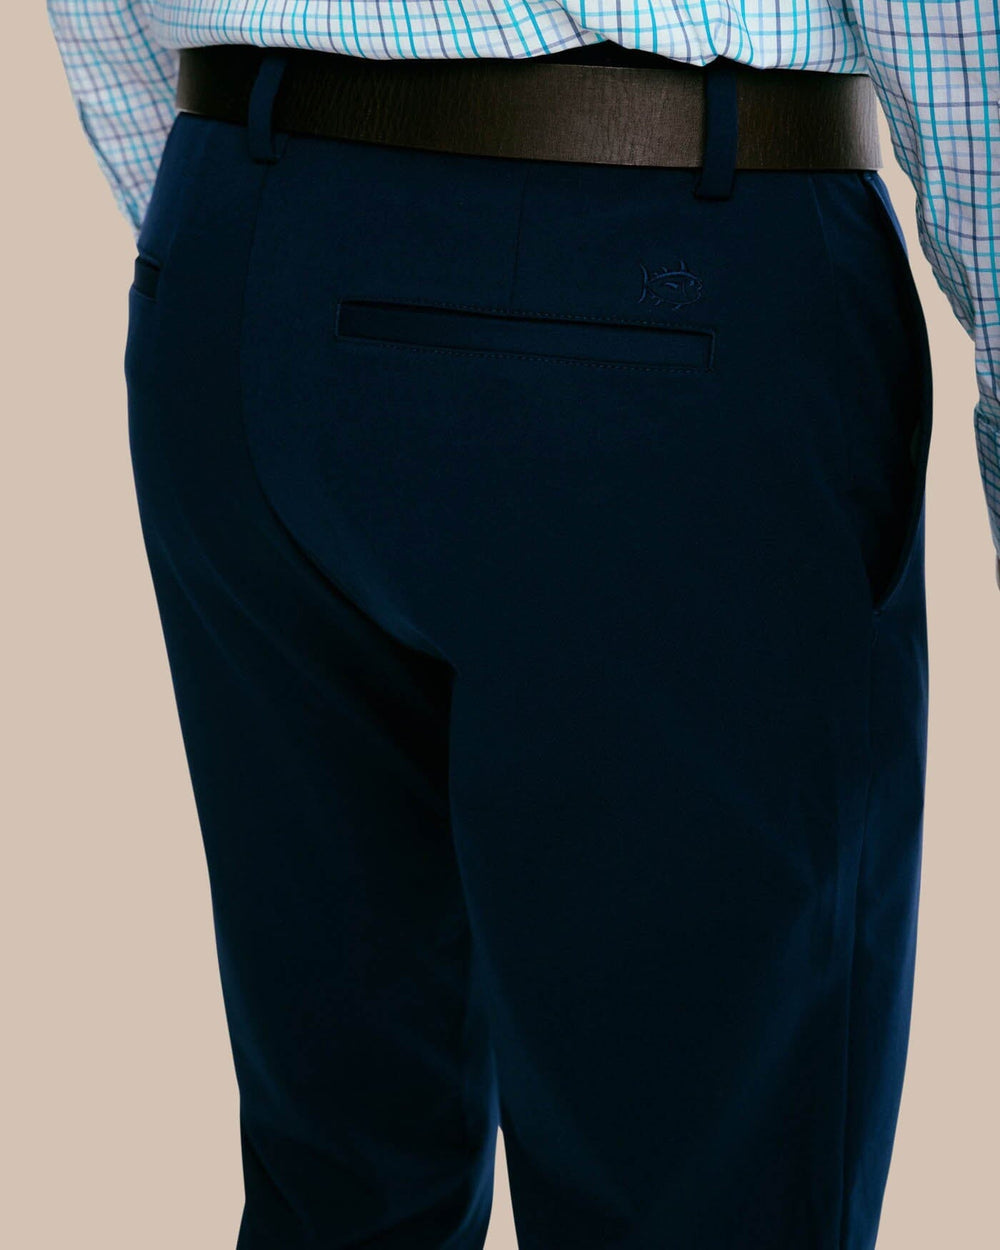 The pocket view of the Men's Jack Performance Pant by Southern Tide - True Navy